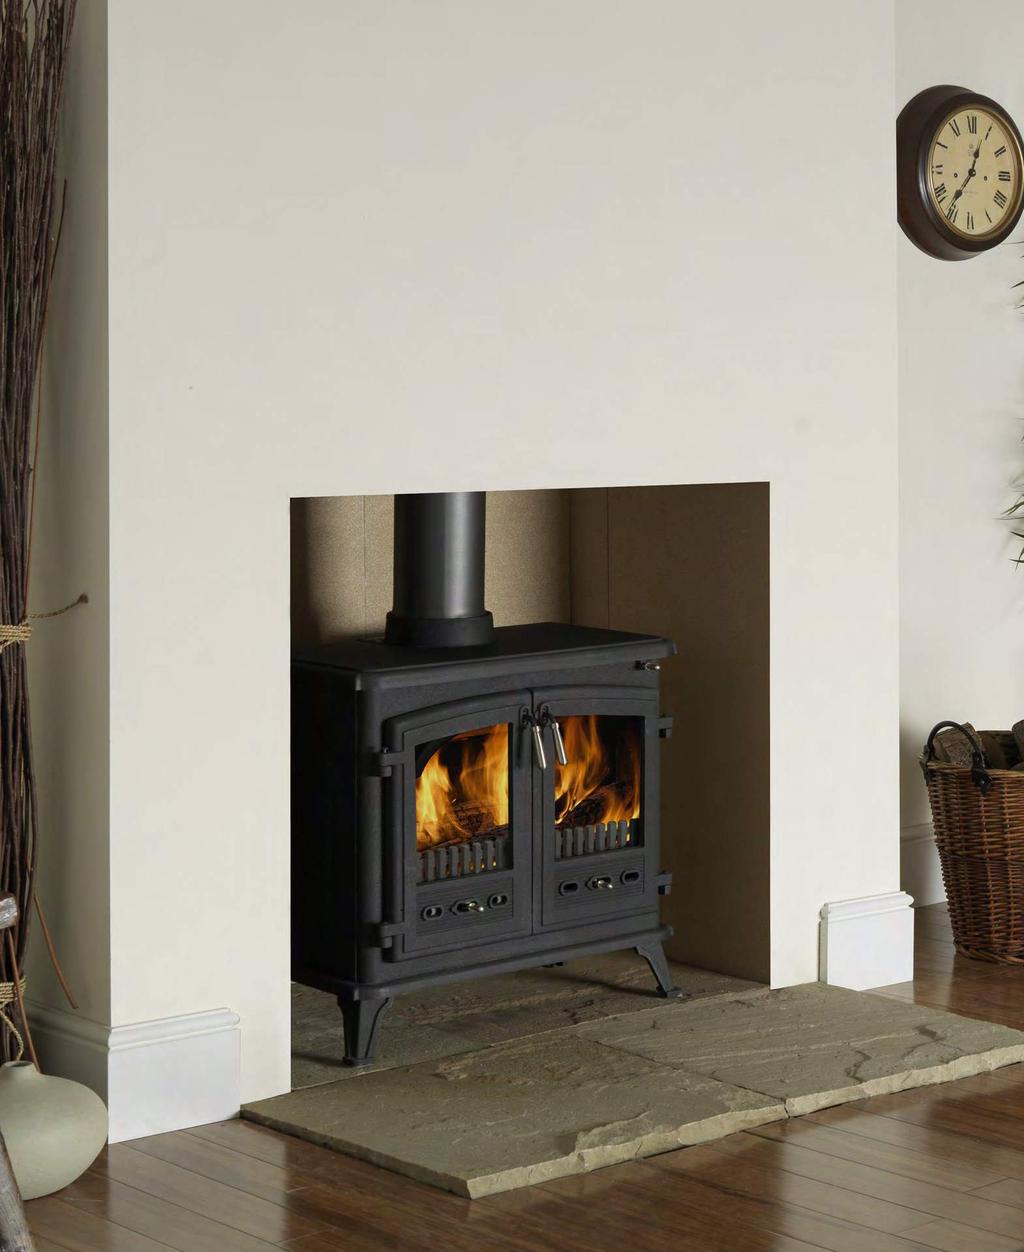 Superior Clean Burning Fires There are two main categories of clean burning fires: Convection fires and Radiant fires. A convection fire has a casing around the firebox which allows the air to flow.